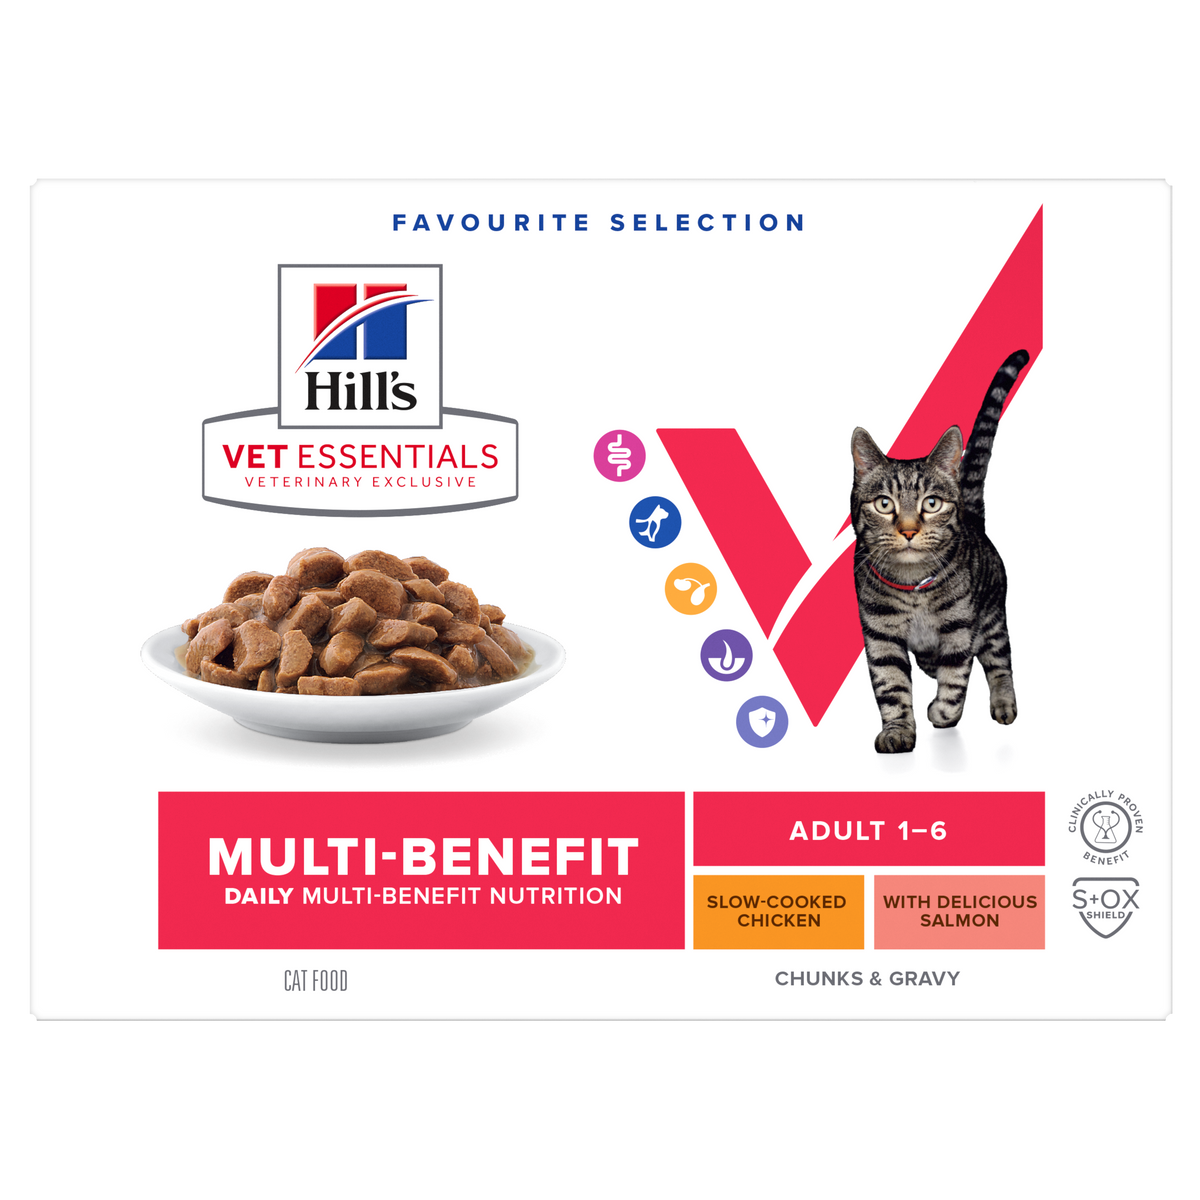 Hill's VET ESSENTIALS MULTI-BENEFIT Adult 1-6 Wet Cat Food Salmon and Slow-cooked Chicken Variety Pack